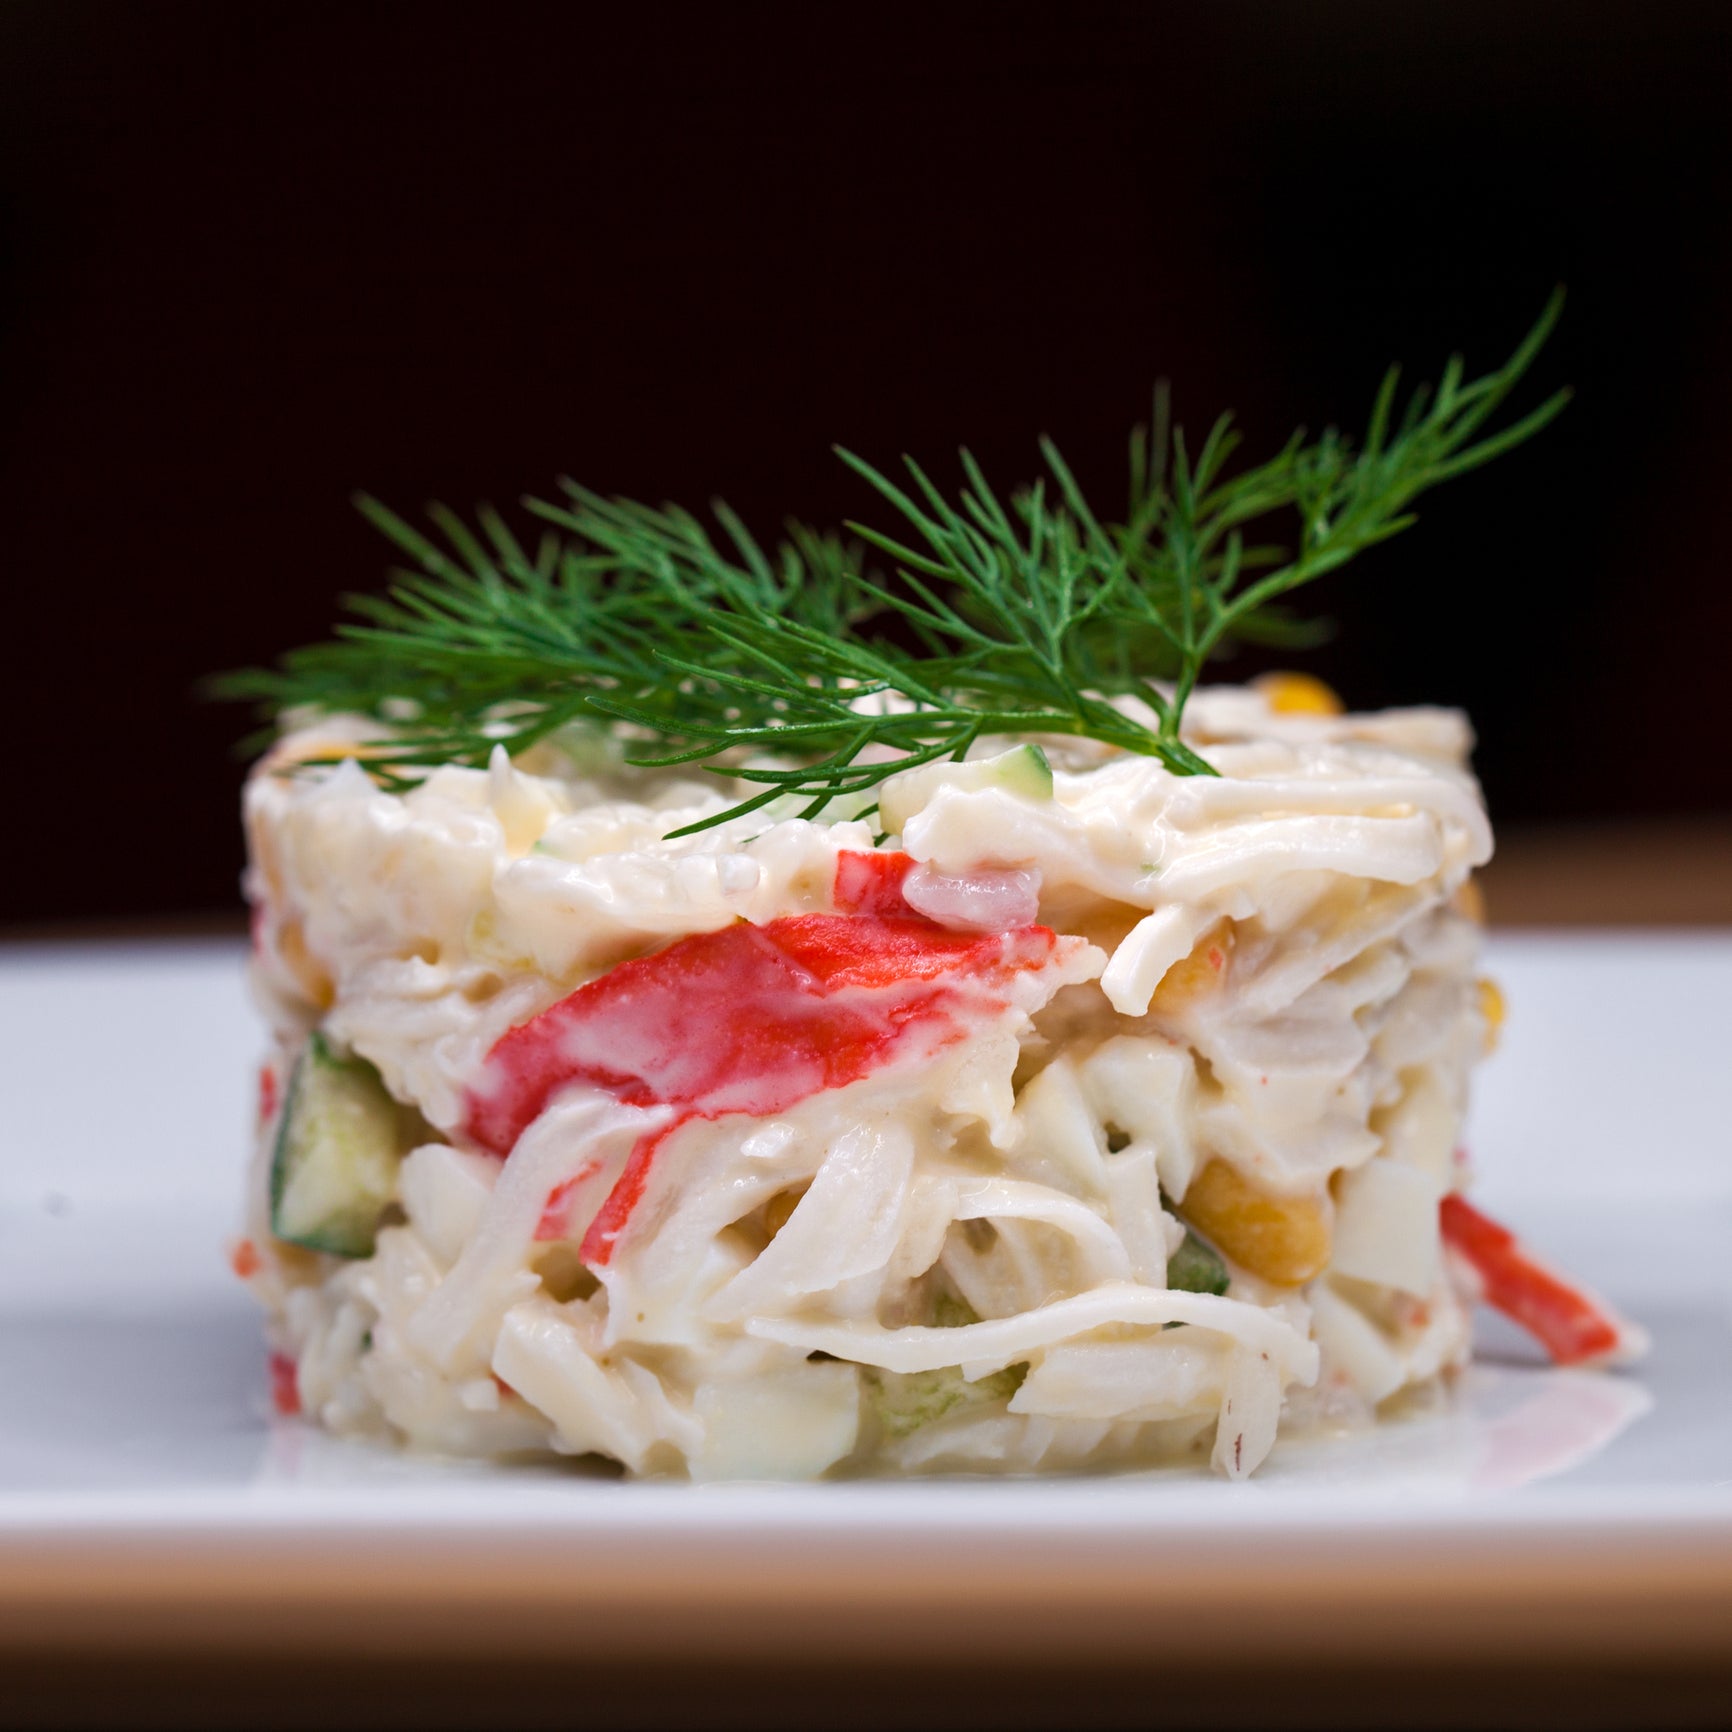 Assorted crab meat varieties on a platter, showcasing the rich textures and colors from claw to king crab, highlighting its gourmet appeal and nutritional value